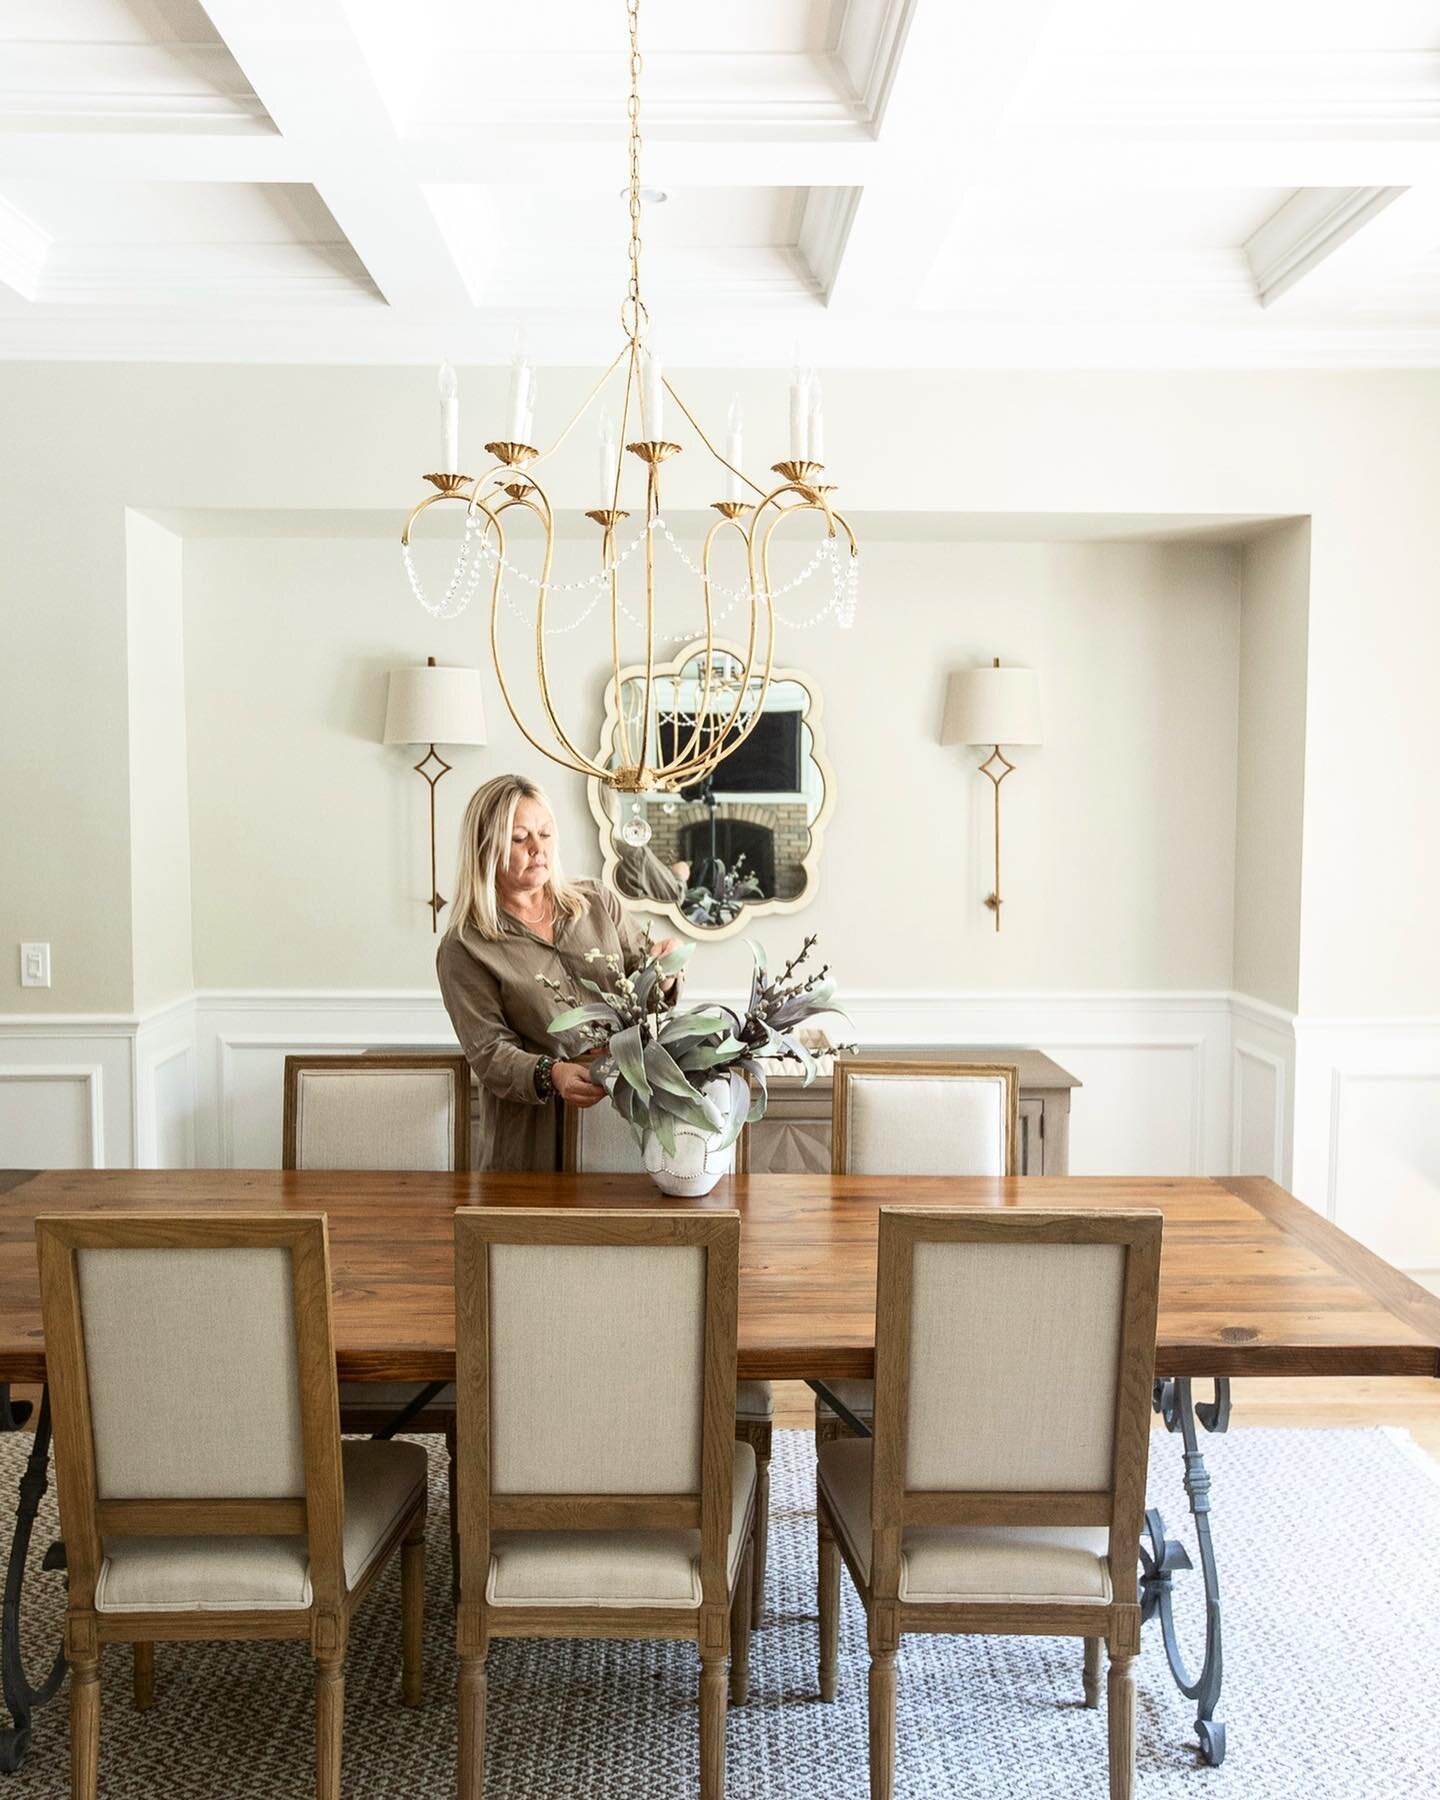 I love adding those special accents that make a living space extra special and unique.

#livingspaces #loveyourhome #uniquedesigns #designyourhome #phoenixdesign #phoenixdesigner #azdesign #azdesigner #diningspace @rachelsmak